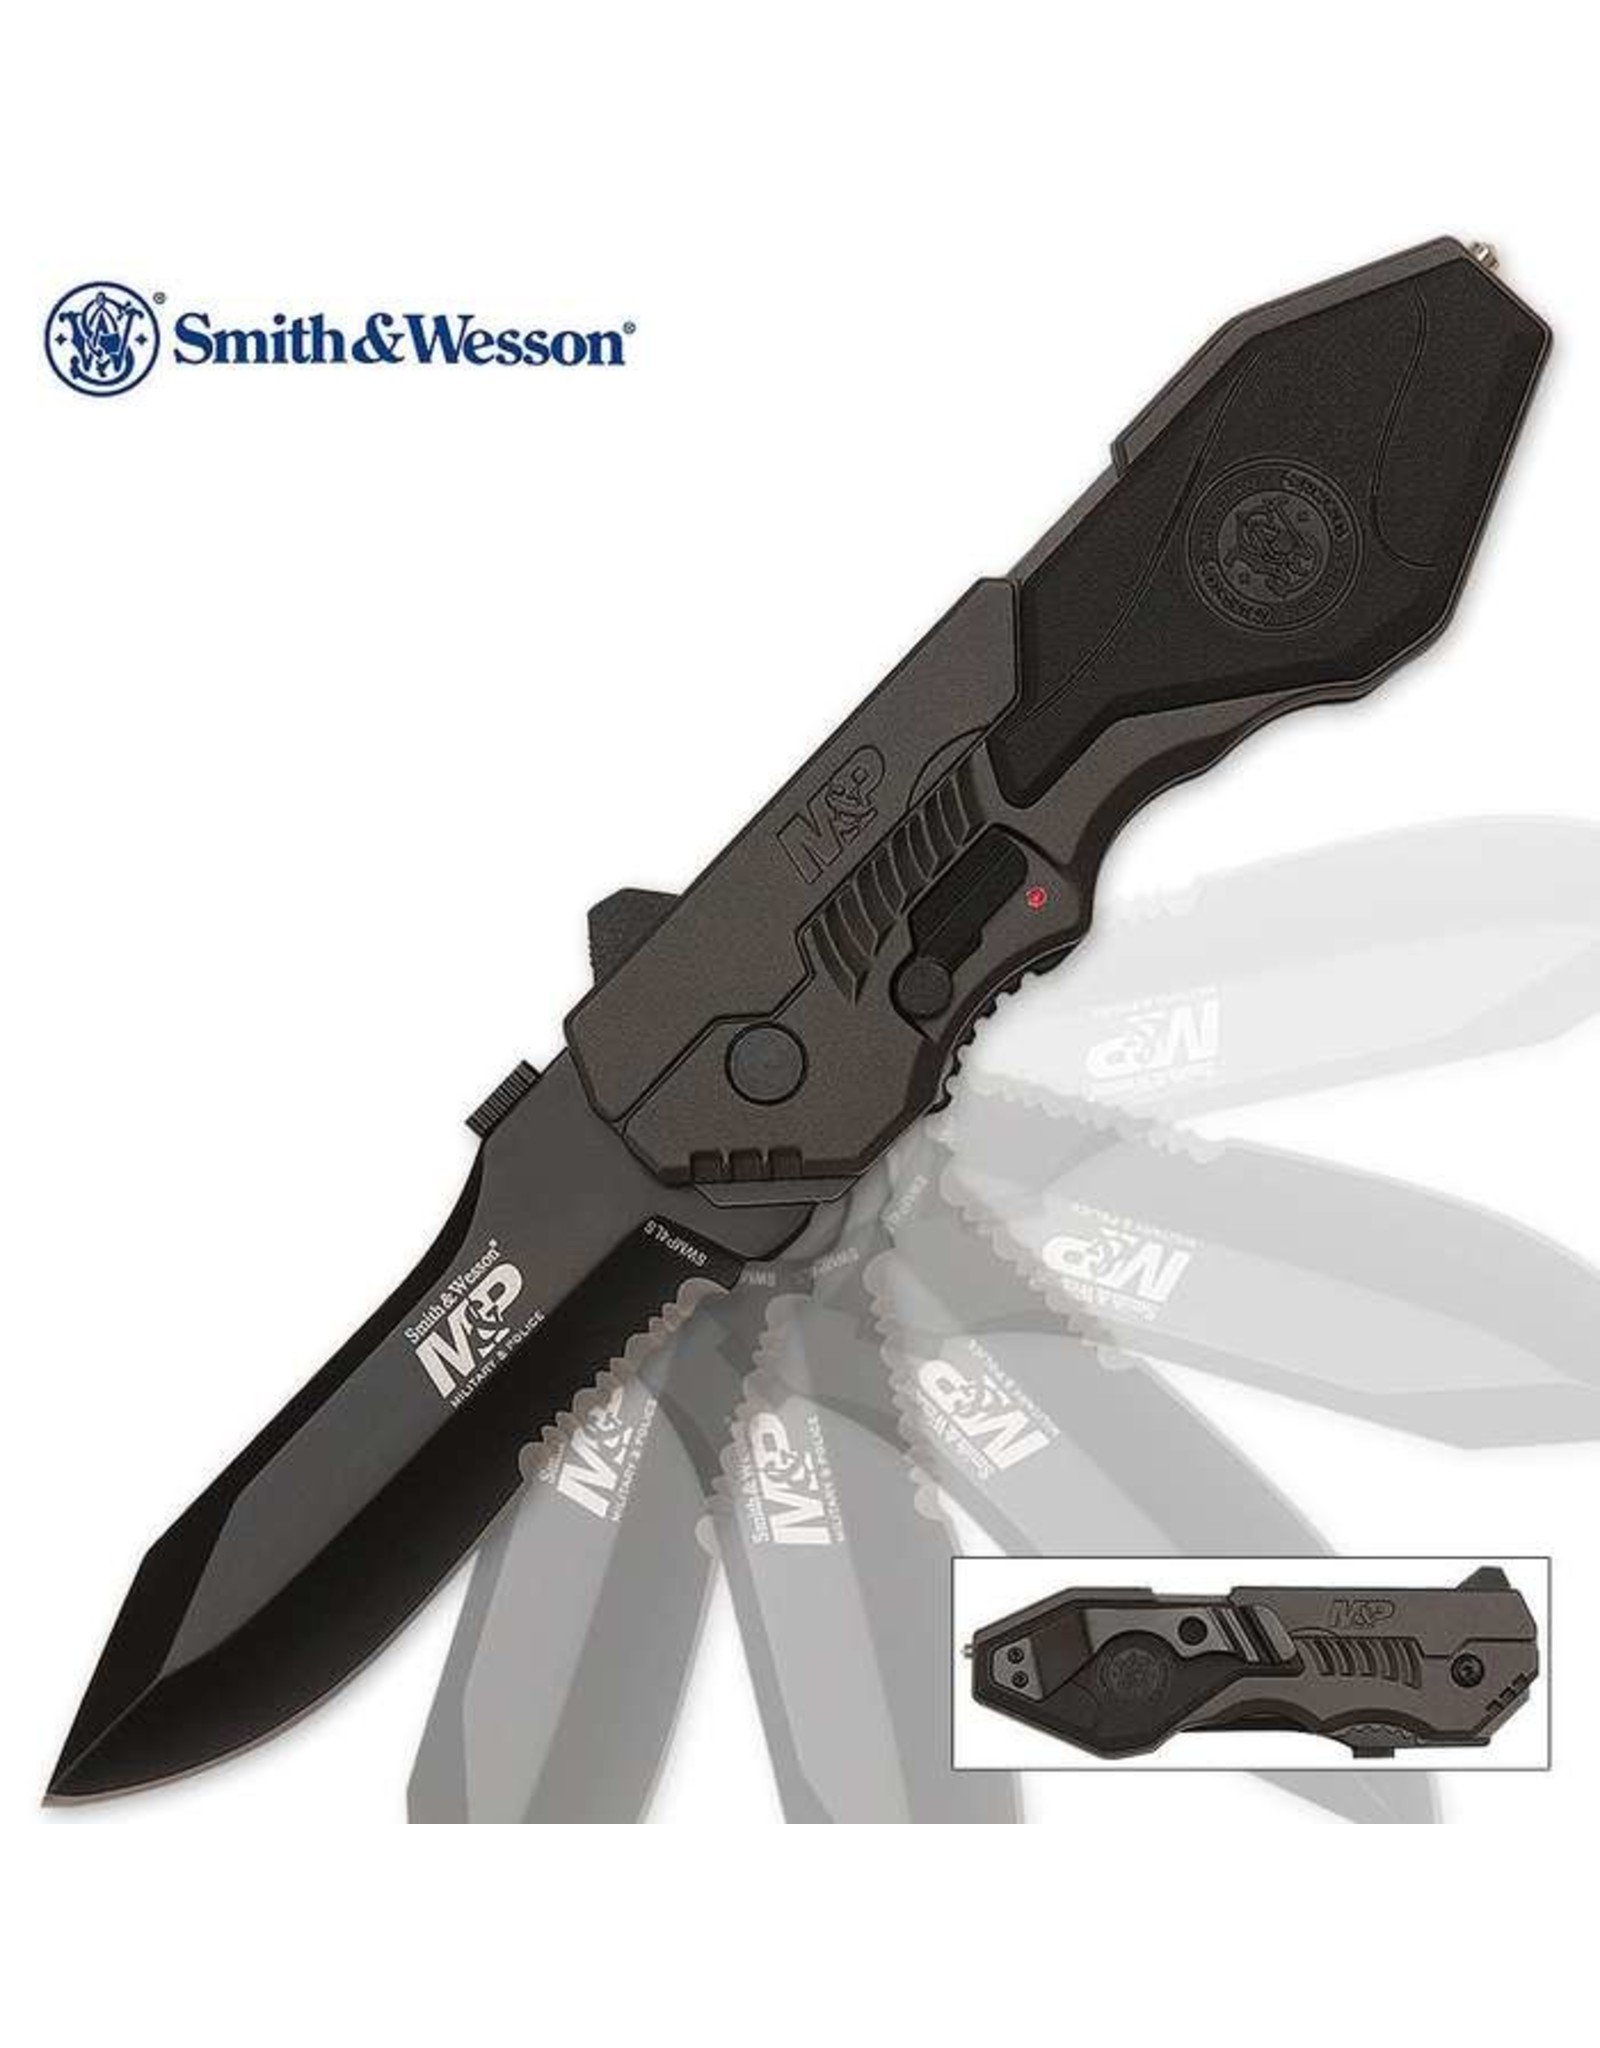 Smith & Wesson 4 M&P Knife - Serrated